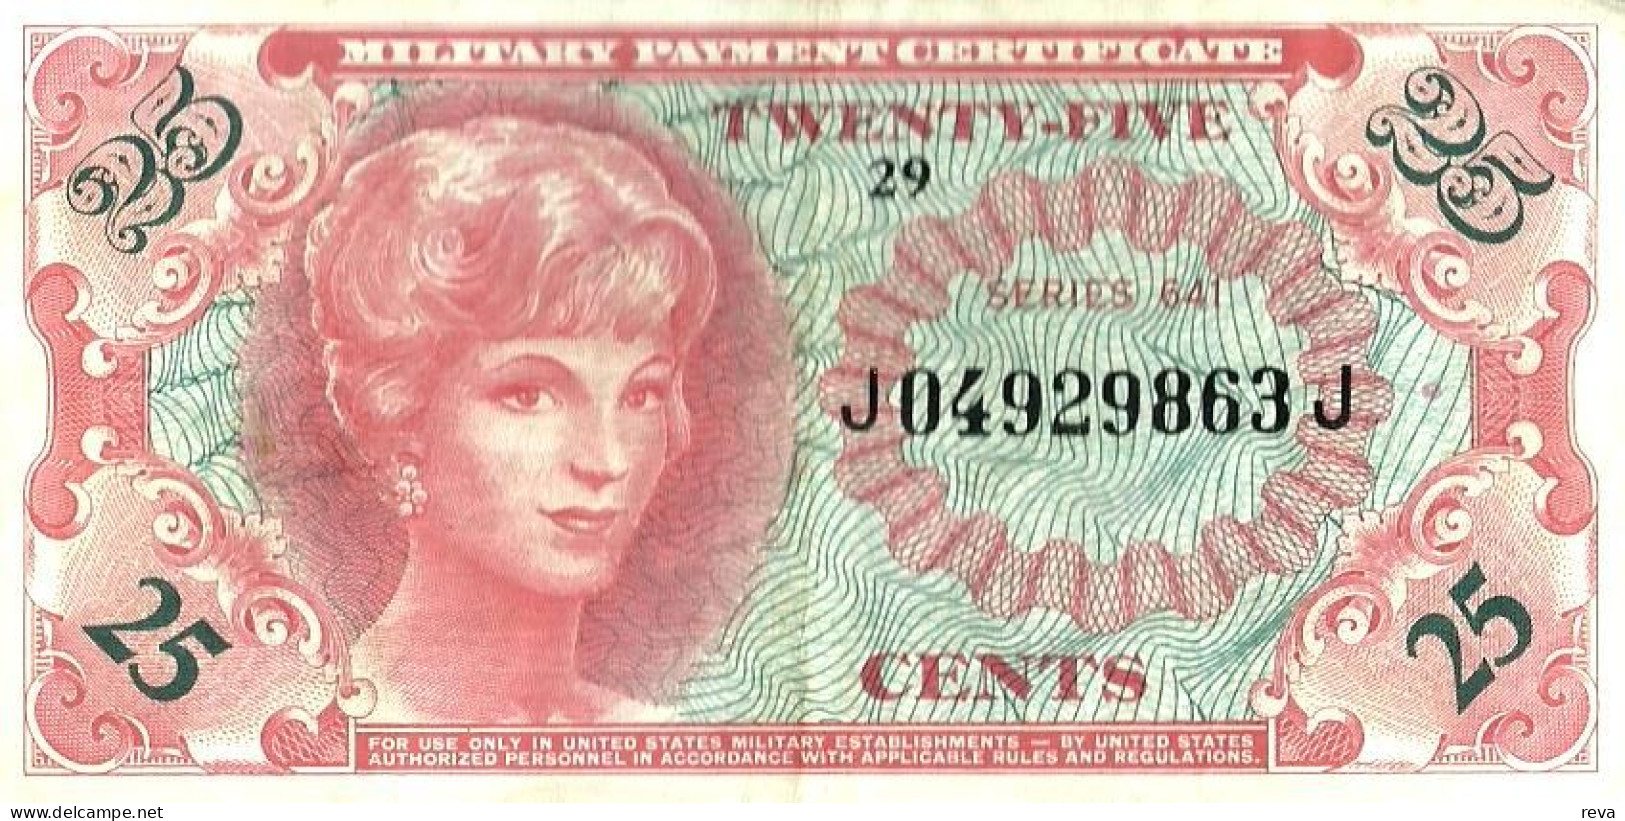 USA UNITED STATES 25 CENTS MILITARY CERTIFICATE RED WOMAN SERIES 641 VF ND(1965-68) PM59a READ DESCRIPTION CAREFULLY !! - 1965-1968 - Serie 641